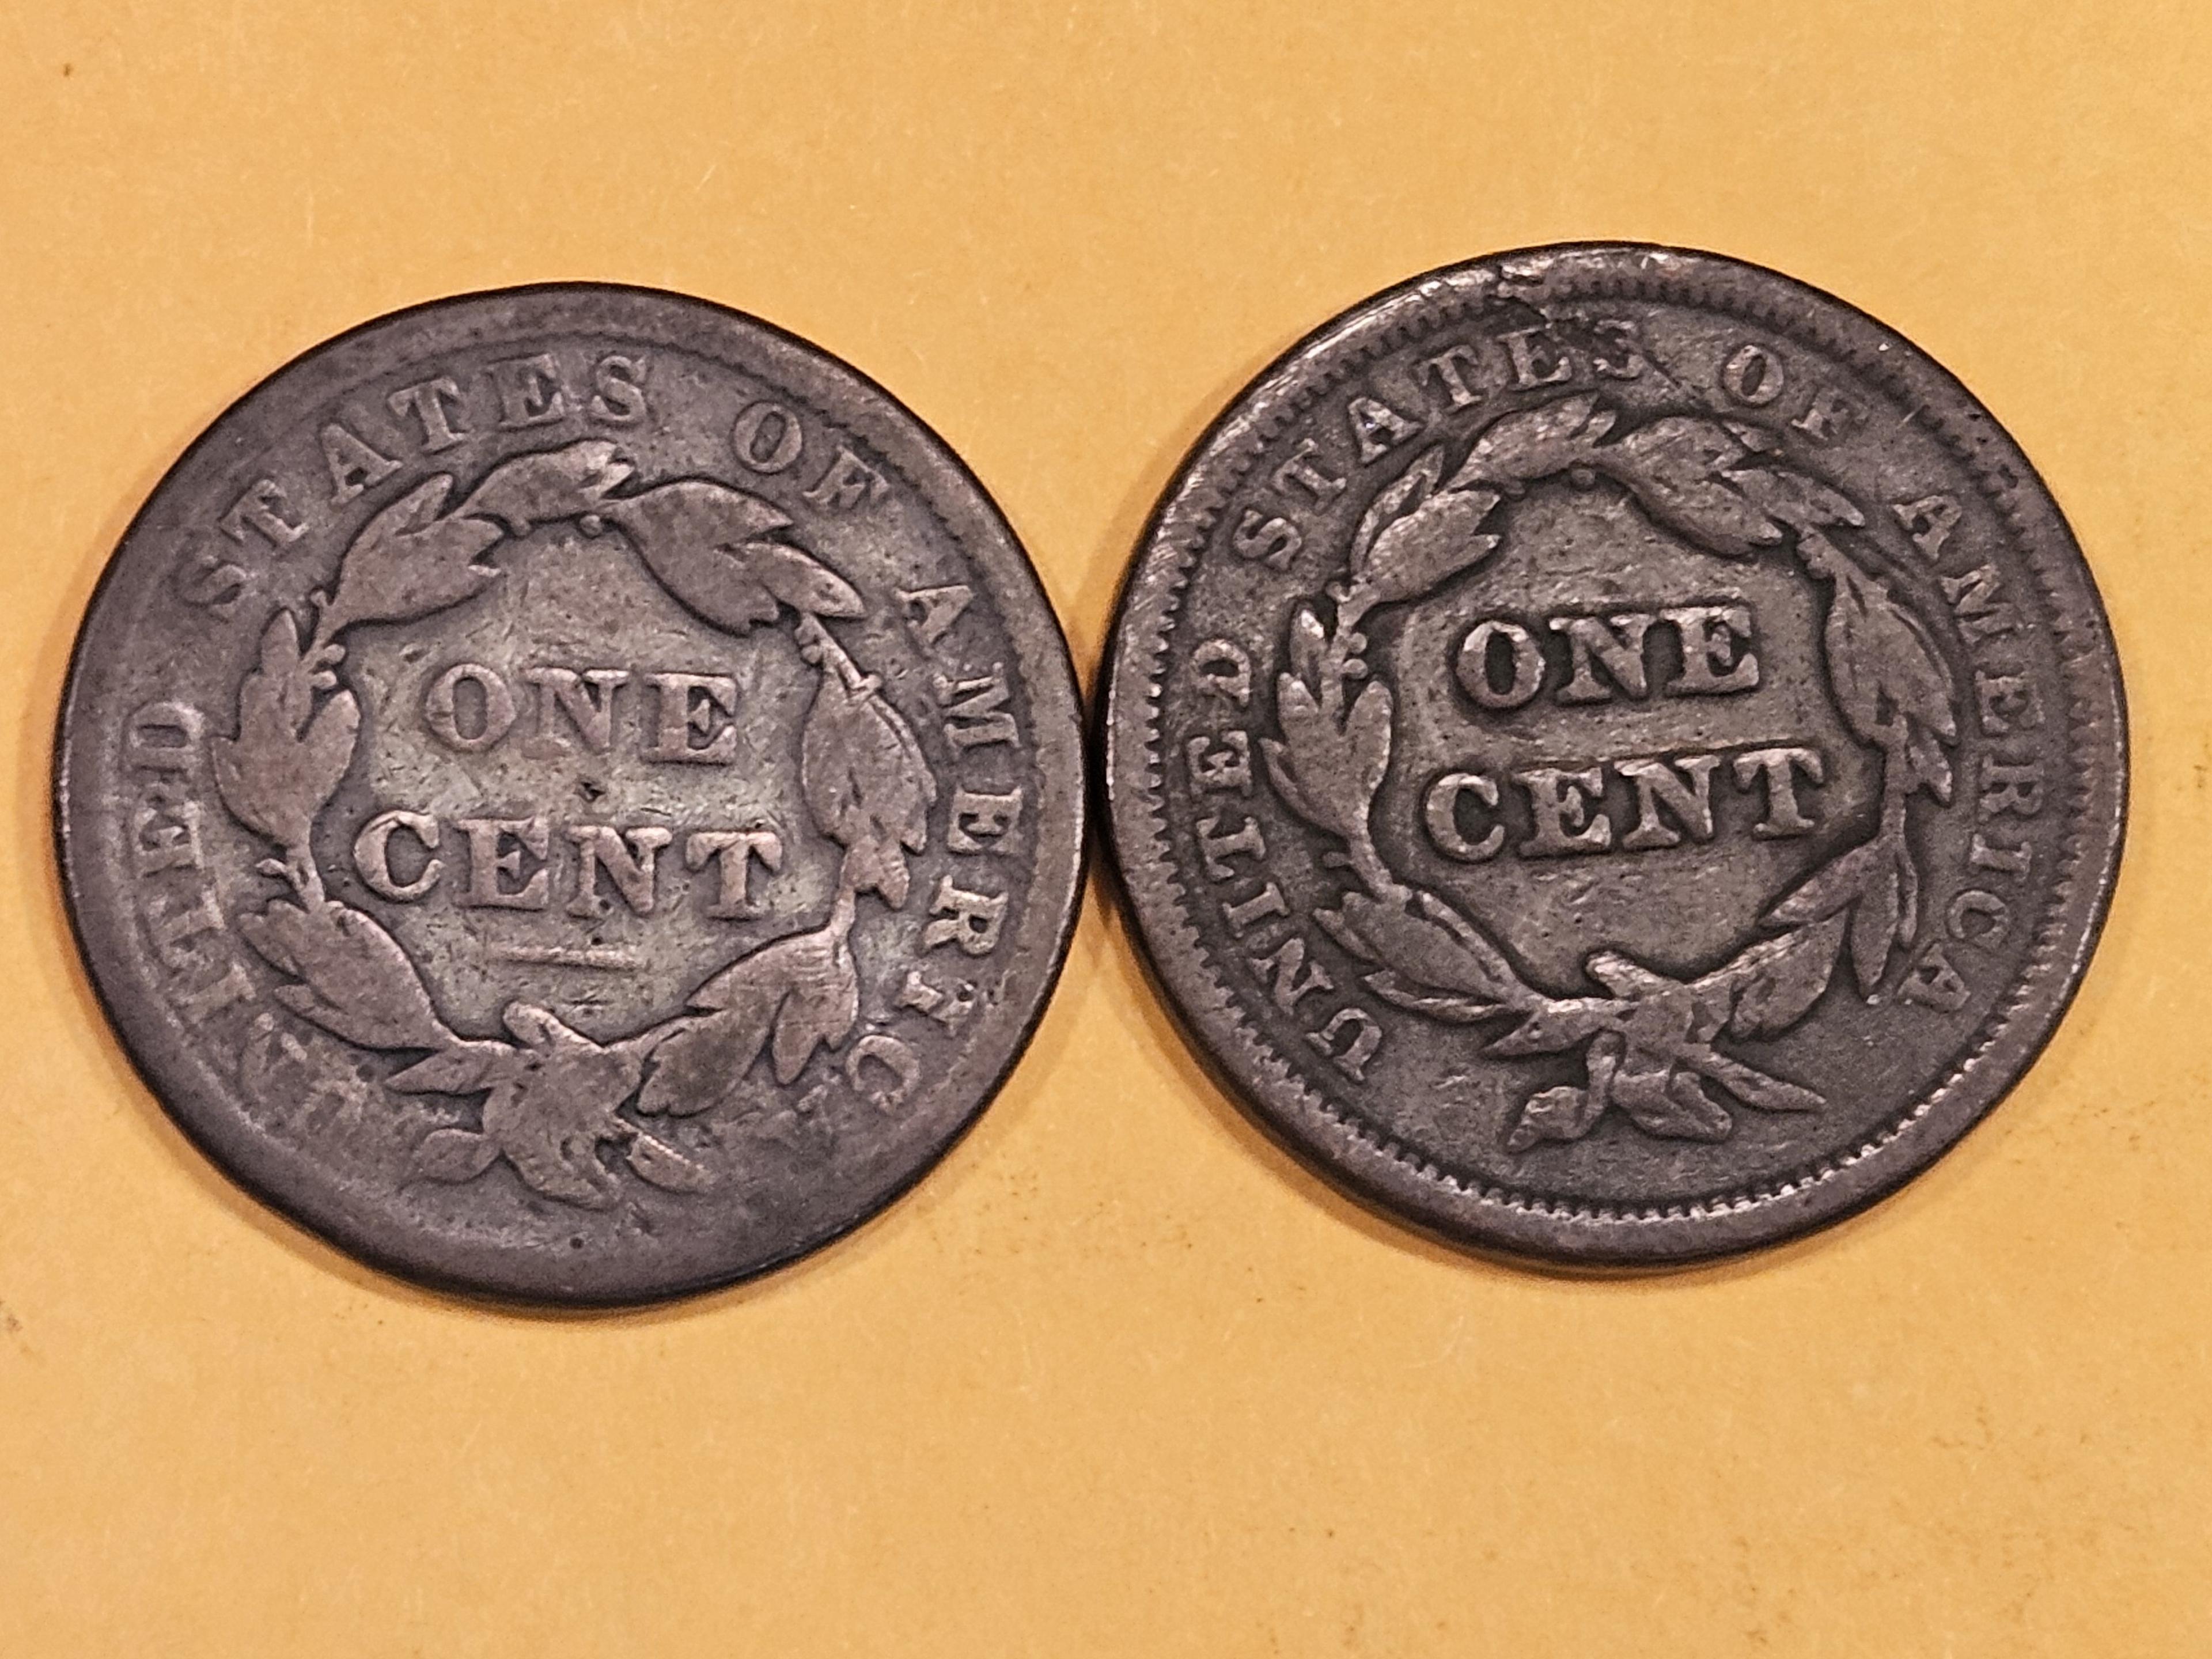 1838 and 1841 Large Cents